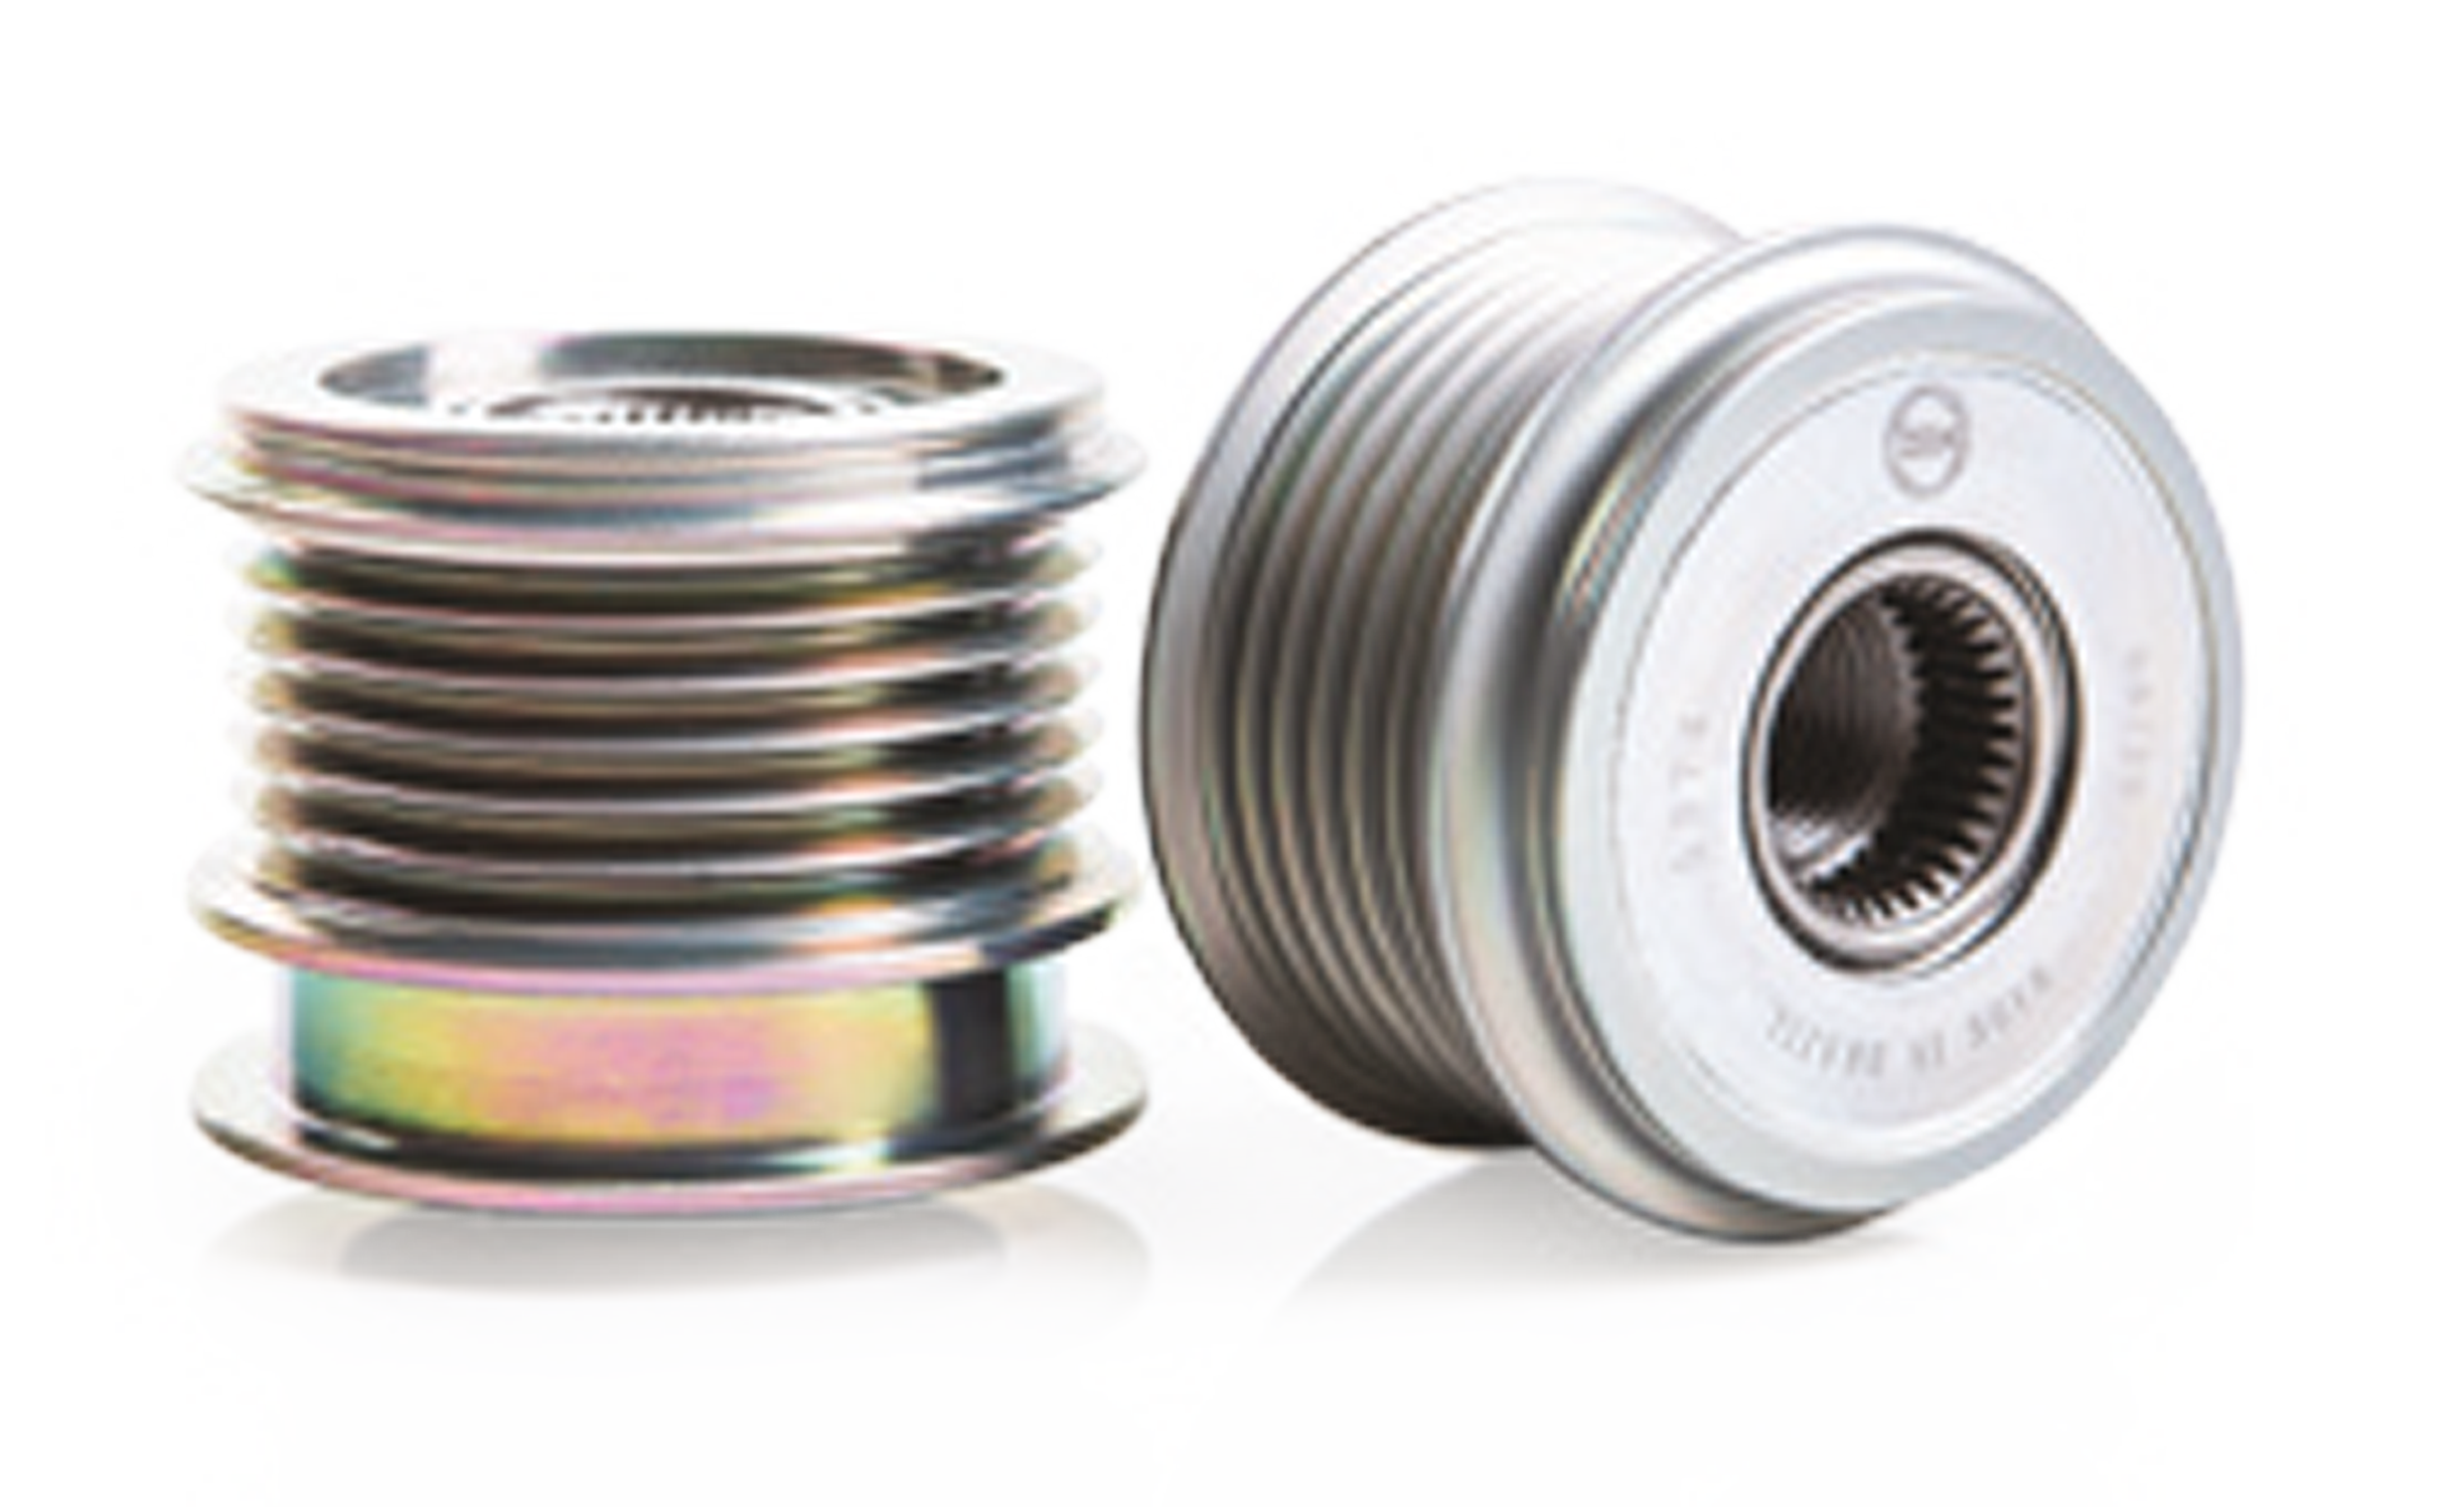 Why Clutch Pulleys should not be replaced with Rigid Pulleys?